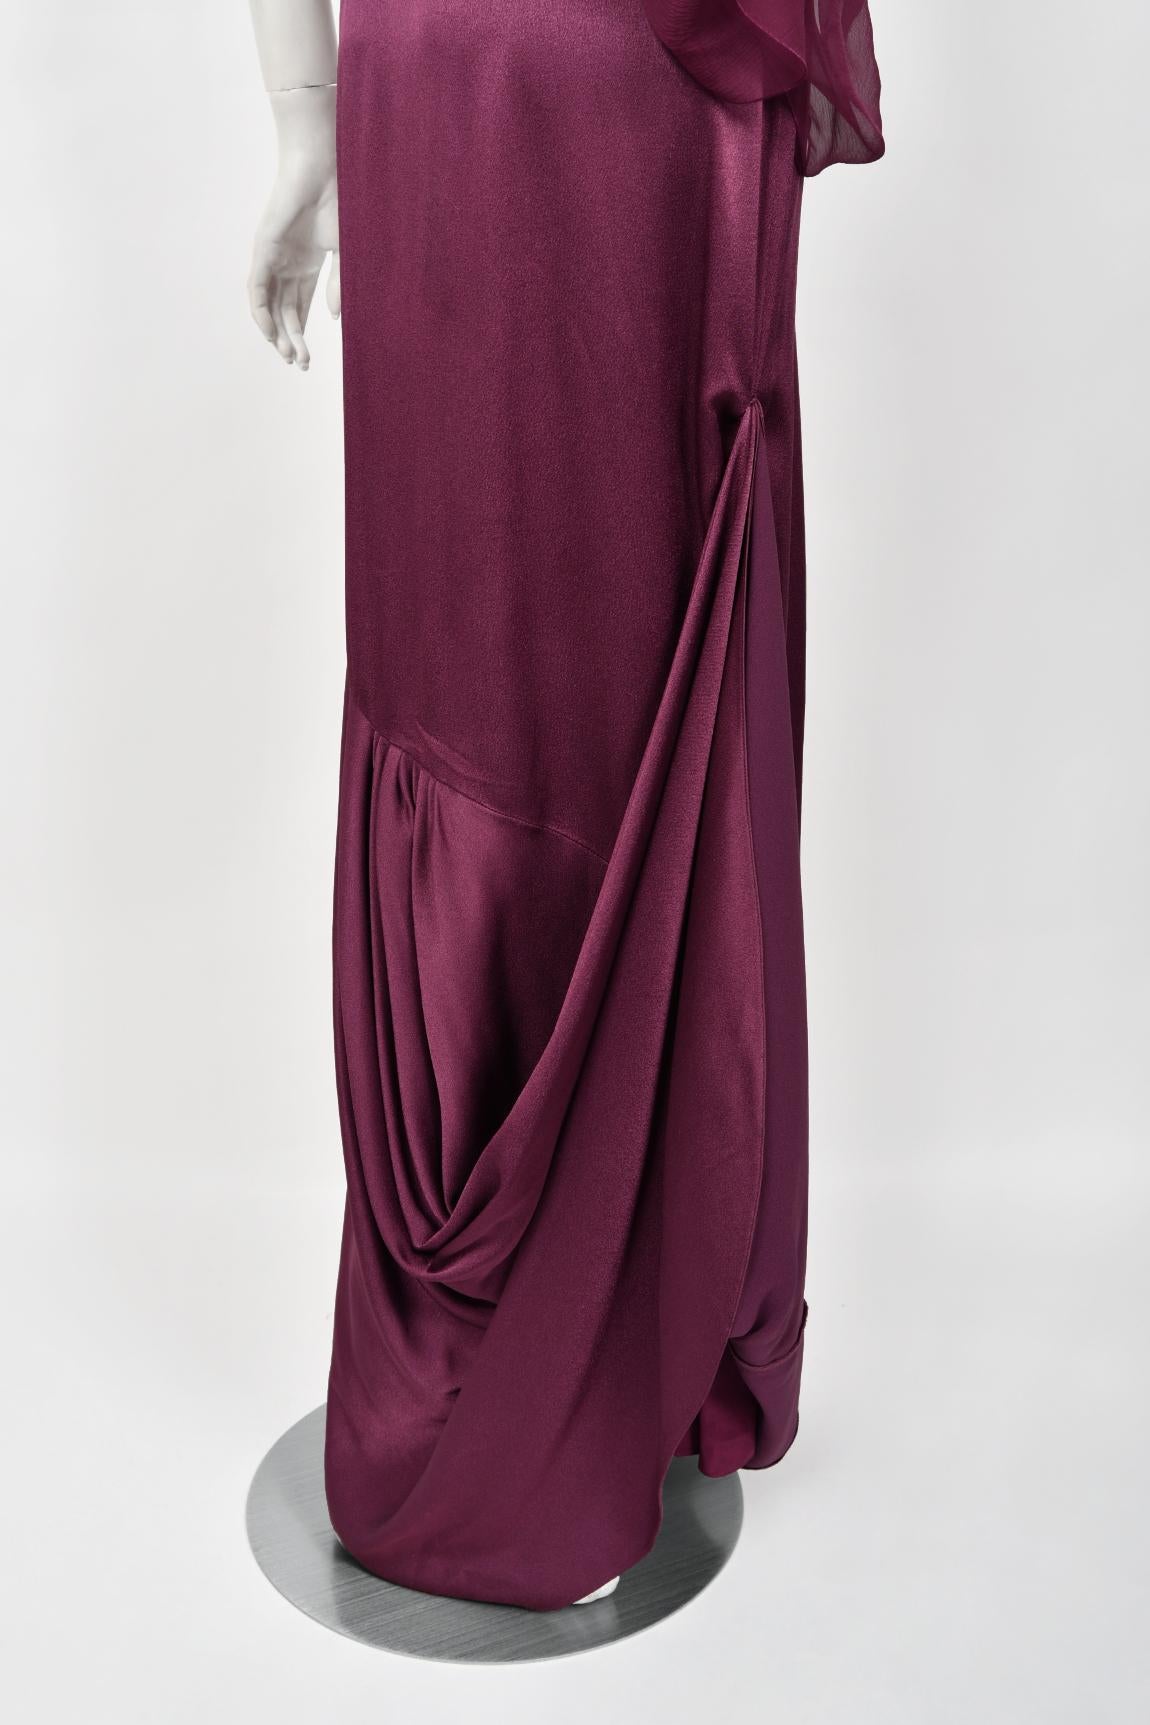 2000 Christian Dior by Galliano Purple Silk Sheer-Sleeve Asymmetric Draped Gown For Sale 5